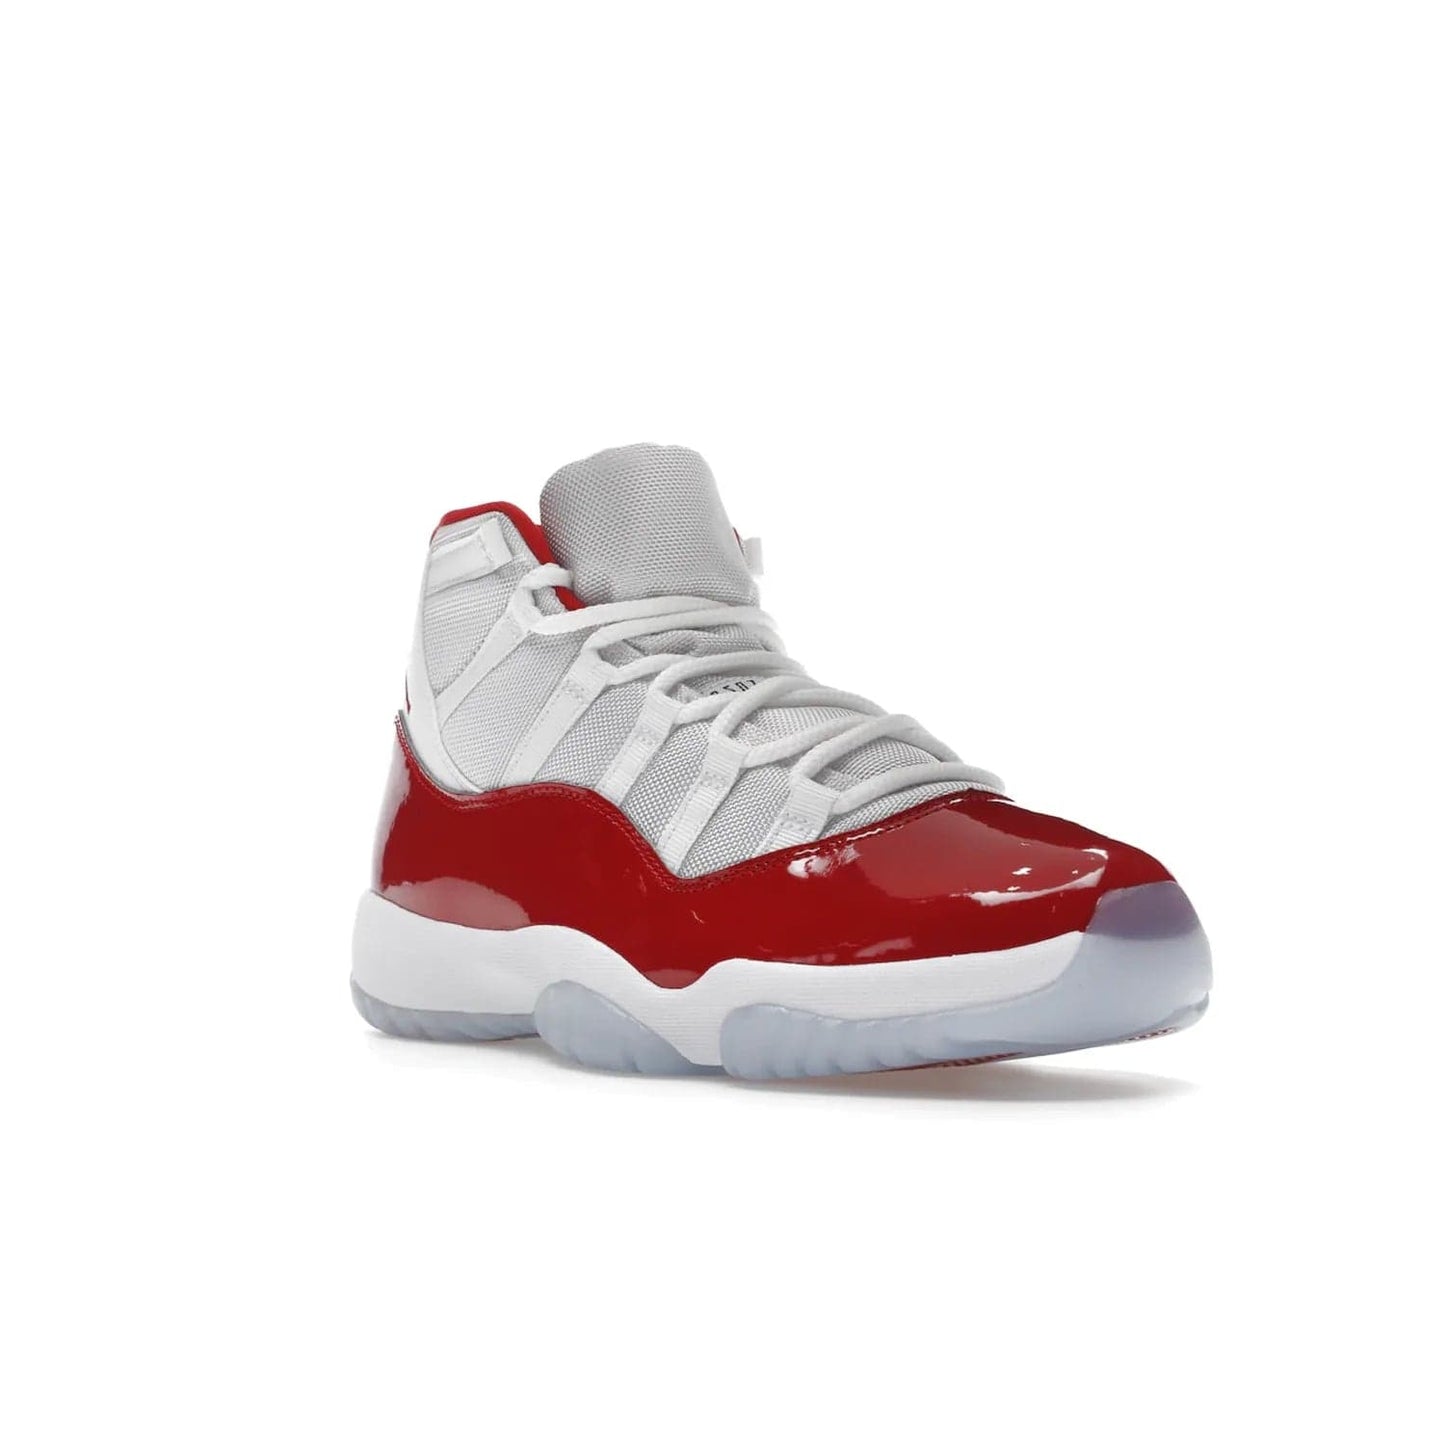 Jordan 11 Retro Cherry (2022) - Image 6 - Only at www.BallersClubKickz.com - The Air Jordan 11 Cherry features classic patent leather with Cherry red accents, icy blue outsole, and debossed 23 on the heel tab. Refresh your sneaker game with this iconic update, available December 10, 2022.